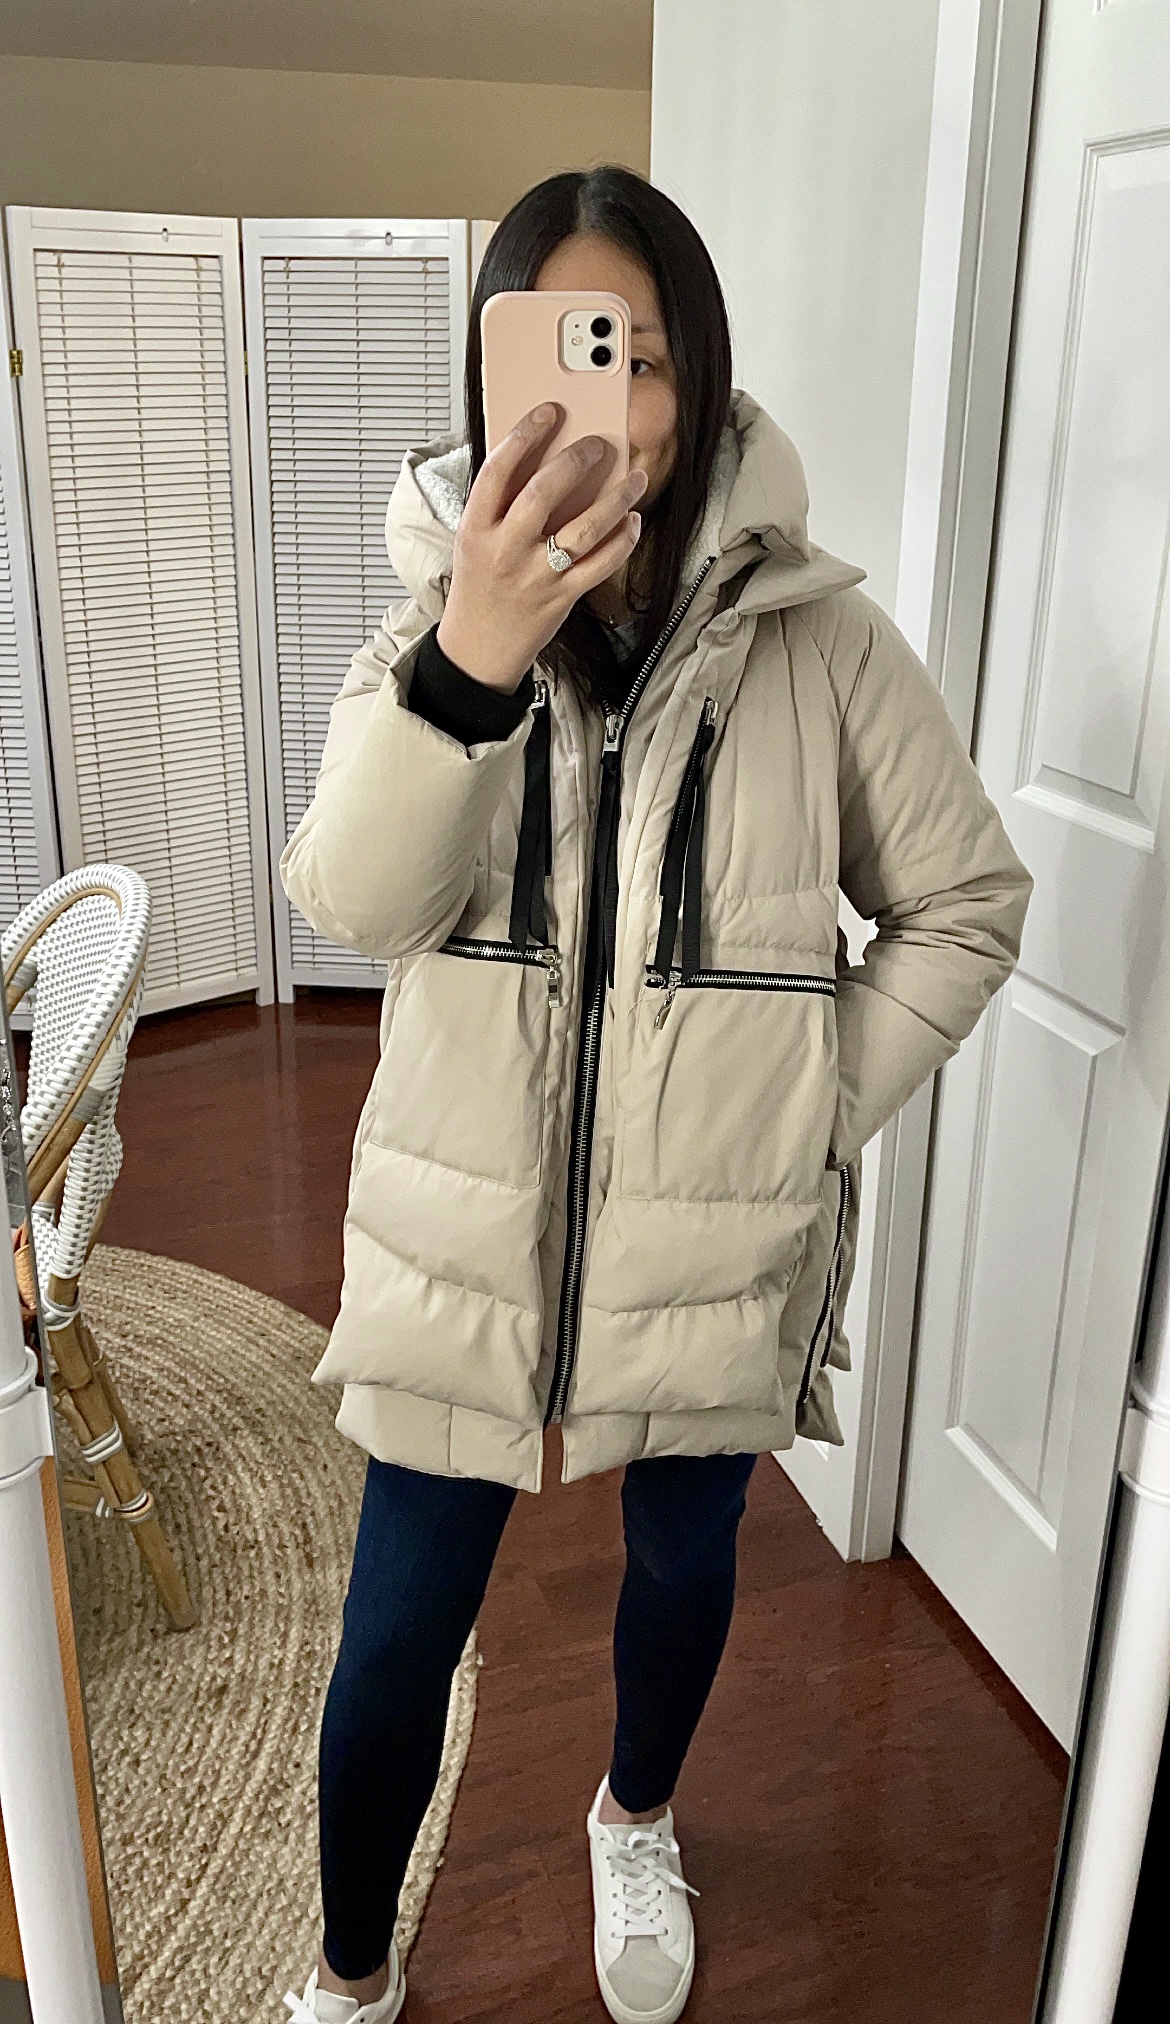 Cross Front Knit Top, Orolay Thickened Down Jacket + Other Recent